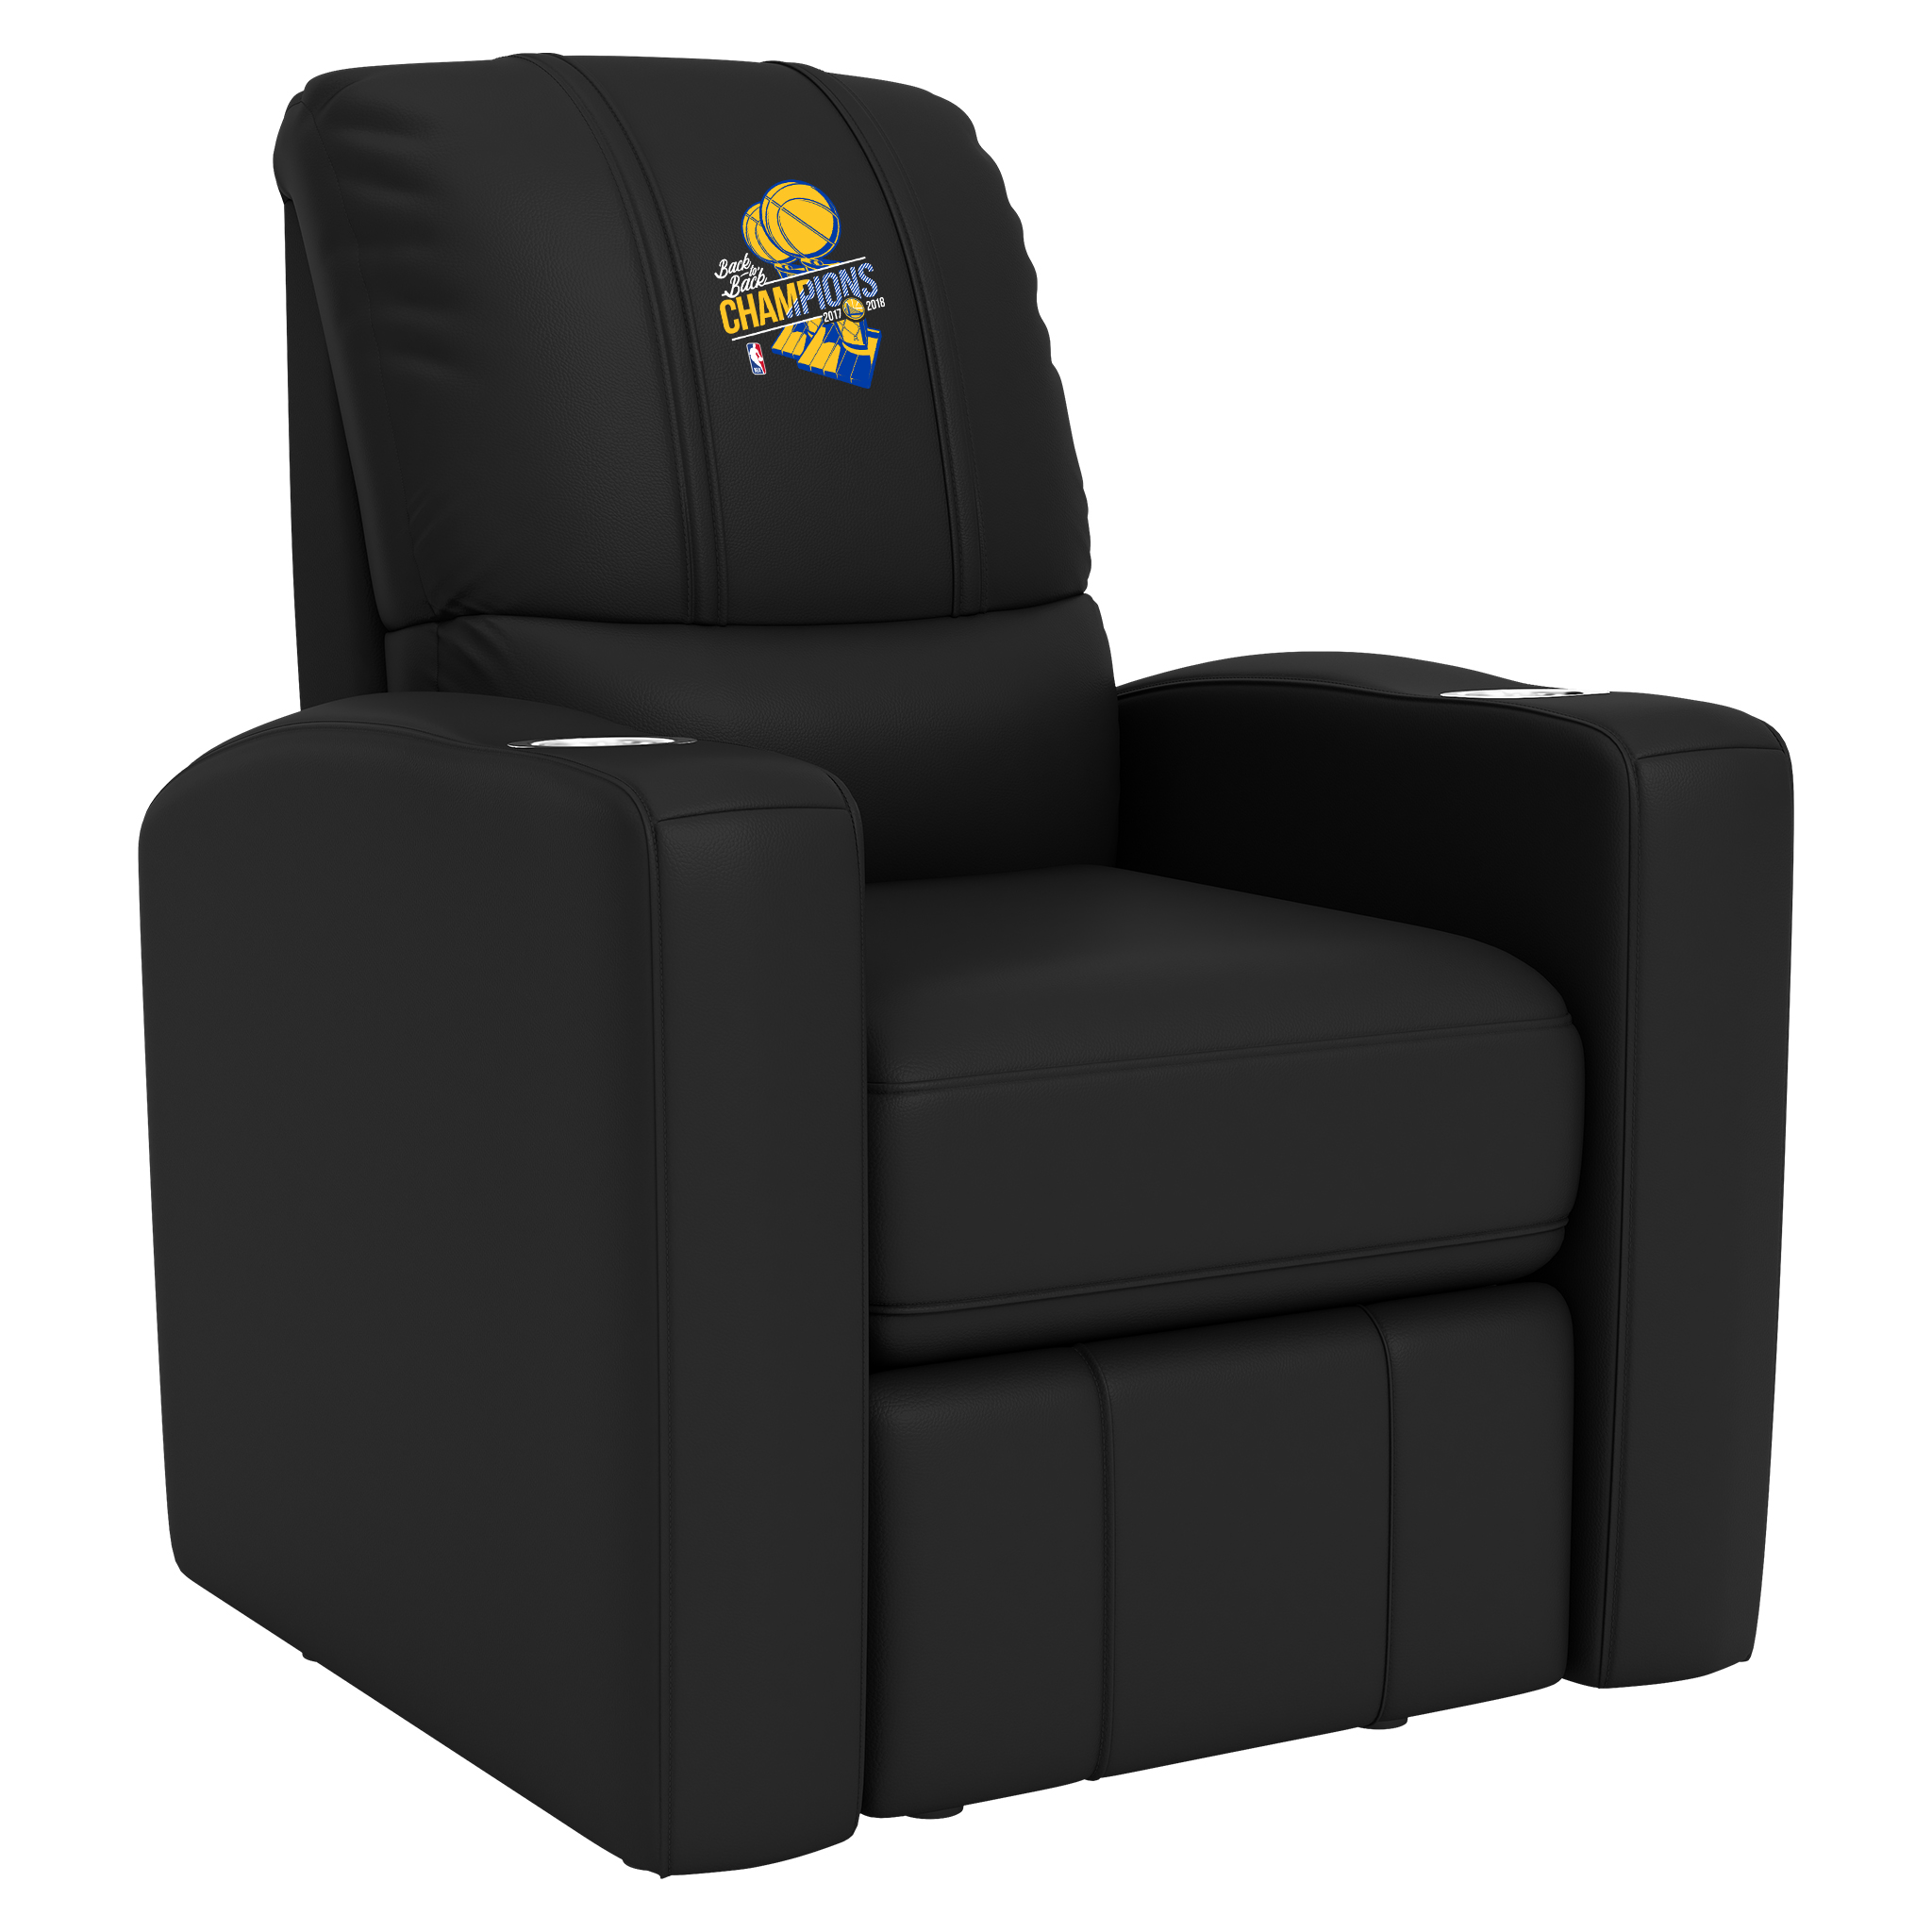 Golden State Warriors Stealth Recliner with Golden State Warriors 2018 Champions Logo Panel